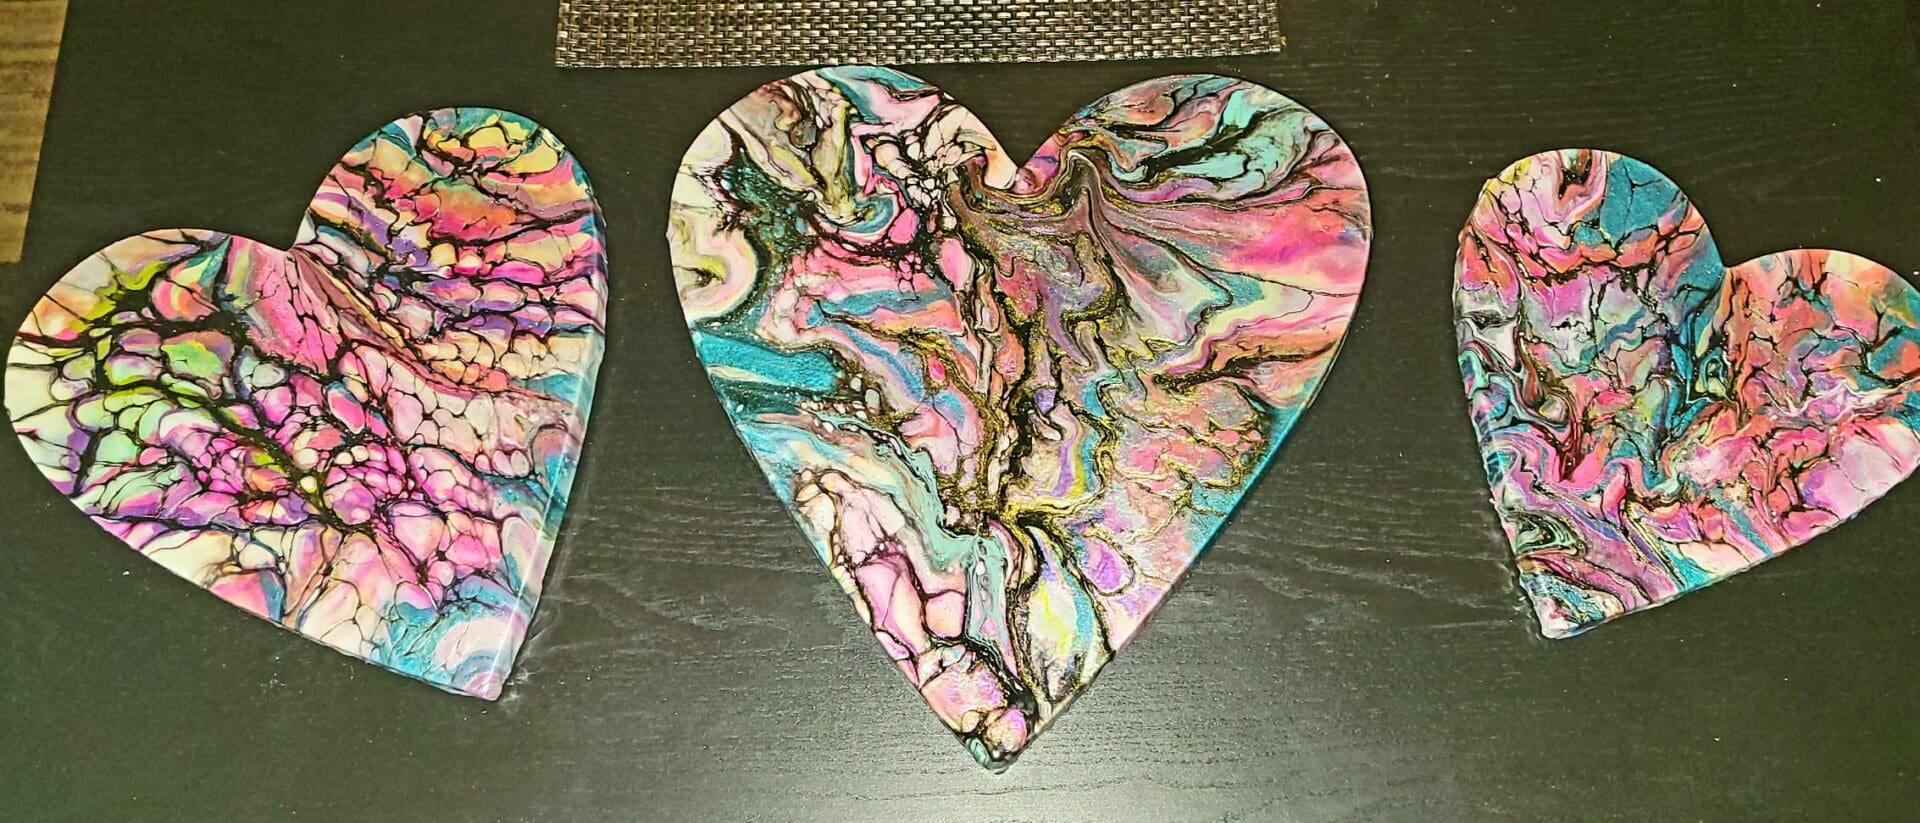 A heart shaped coaster with colorful designs on it.